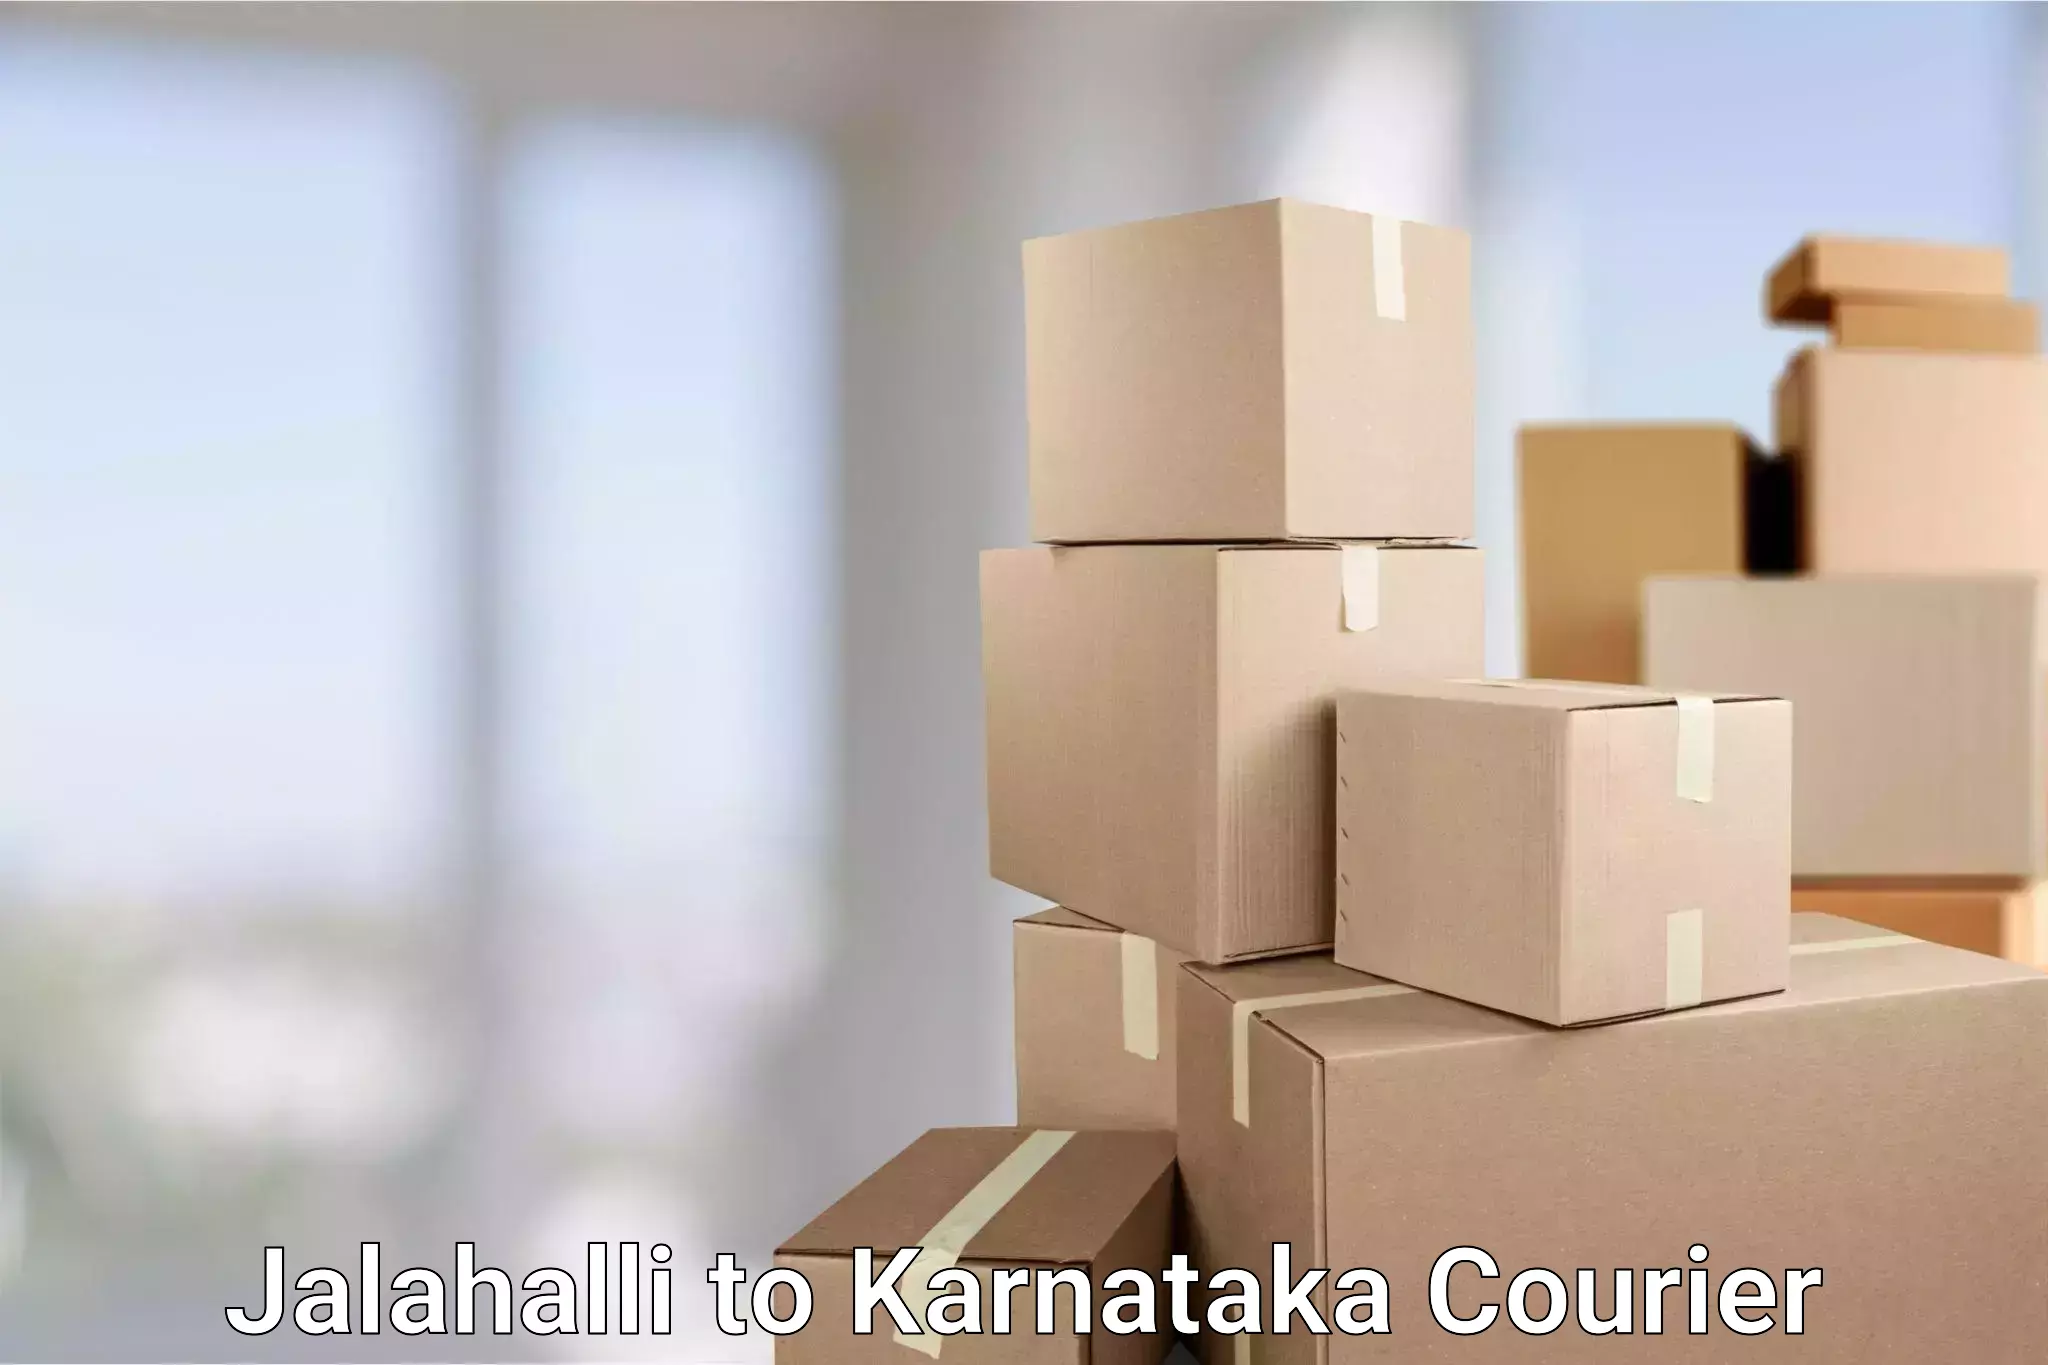 Round-the-clock parcel delivery Jalahalli to Yellare